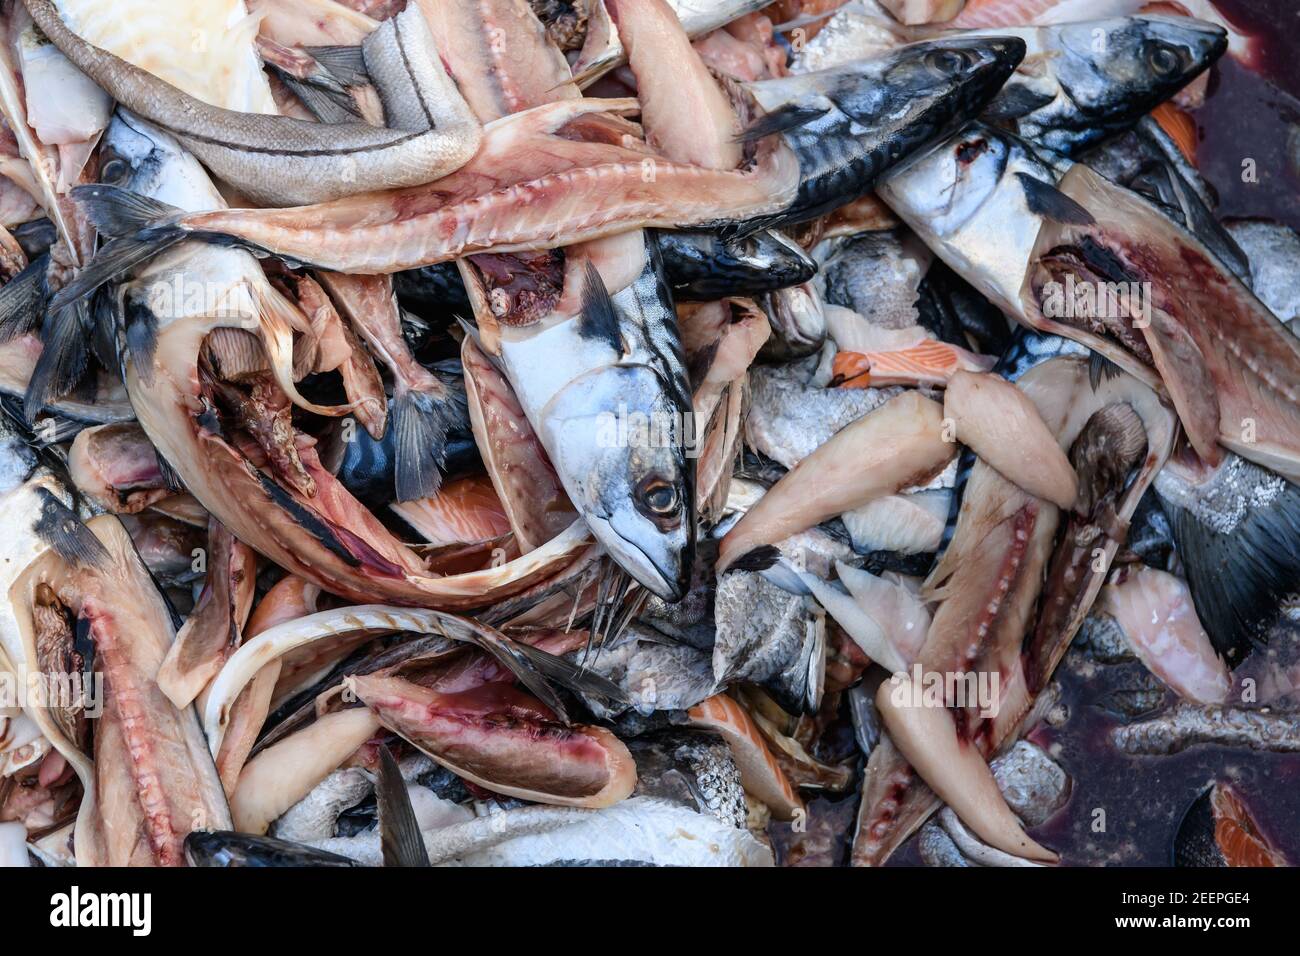 Food waste, fish heads and fish guts in a food waste bin at the Birmingham Wholesale Markert, Birmingham, England, UK Stock Photo